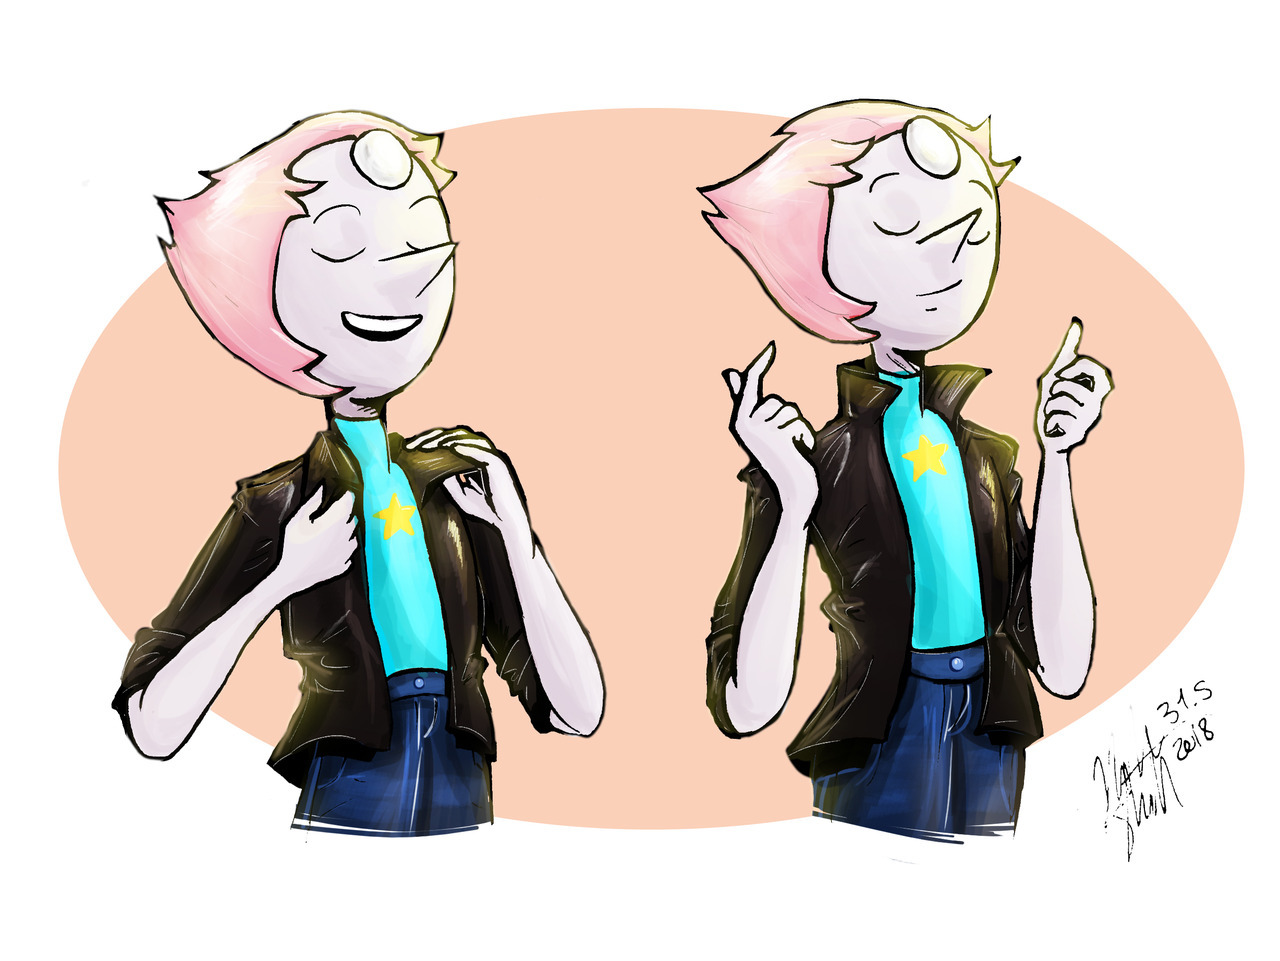 also did a leather jacket pearl because, look at her